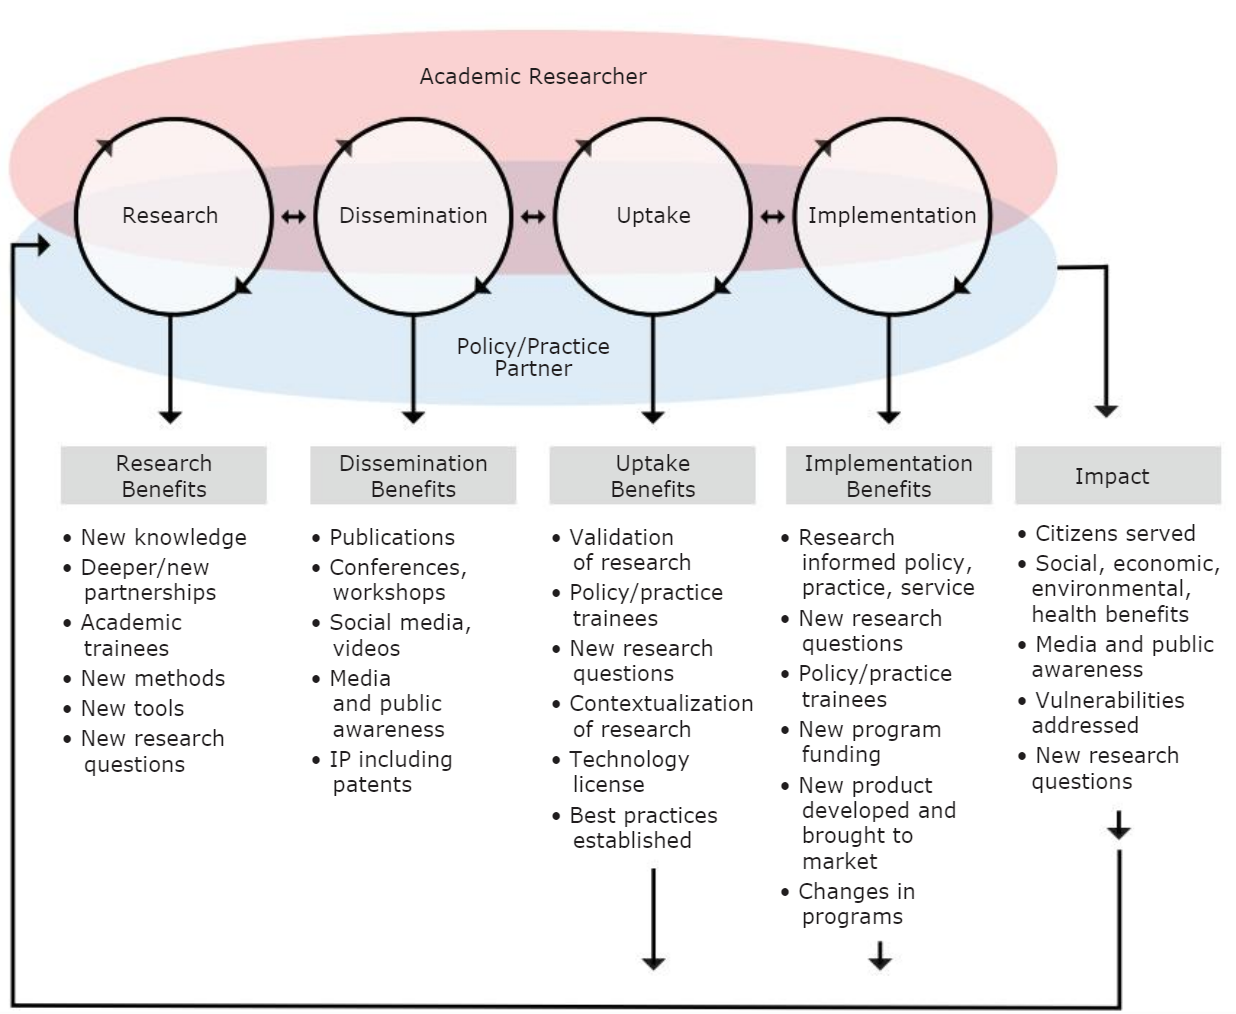 Four circles at the top of the chart feed into five categories. Research into Research benefits, Dissemination into Dissemination Benefits, Uptake into Update Benefits, Implementation into Implementation Benefits. All of these flow into impact, which then feeds backing to research. Uptake benefits and Implementation benefits feedback into the process of research.